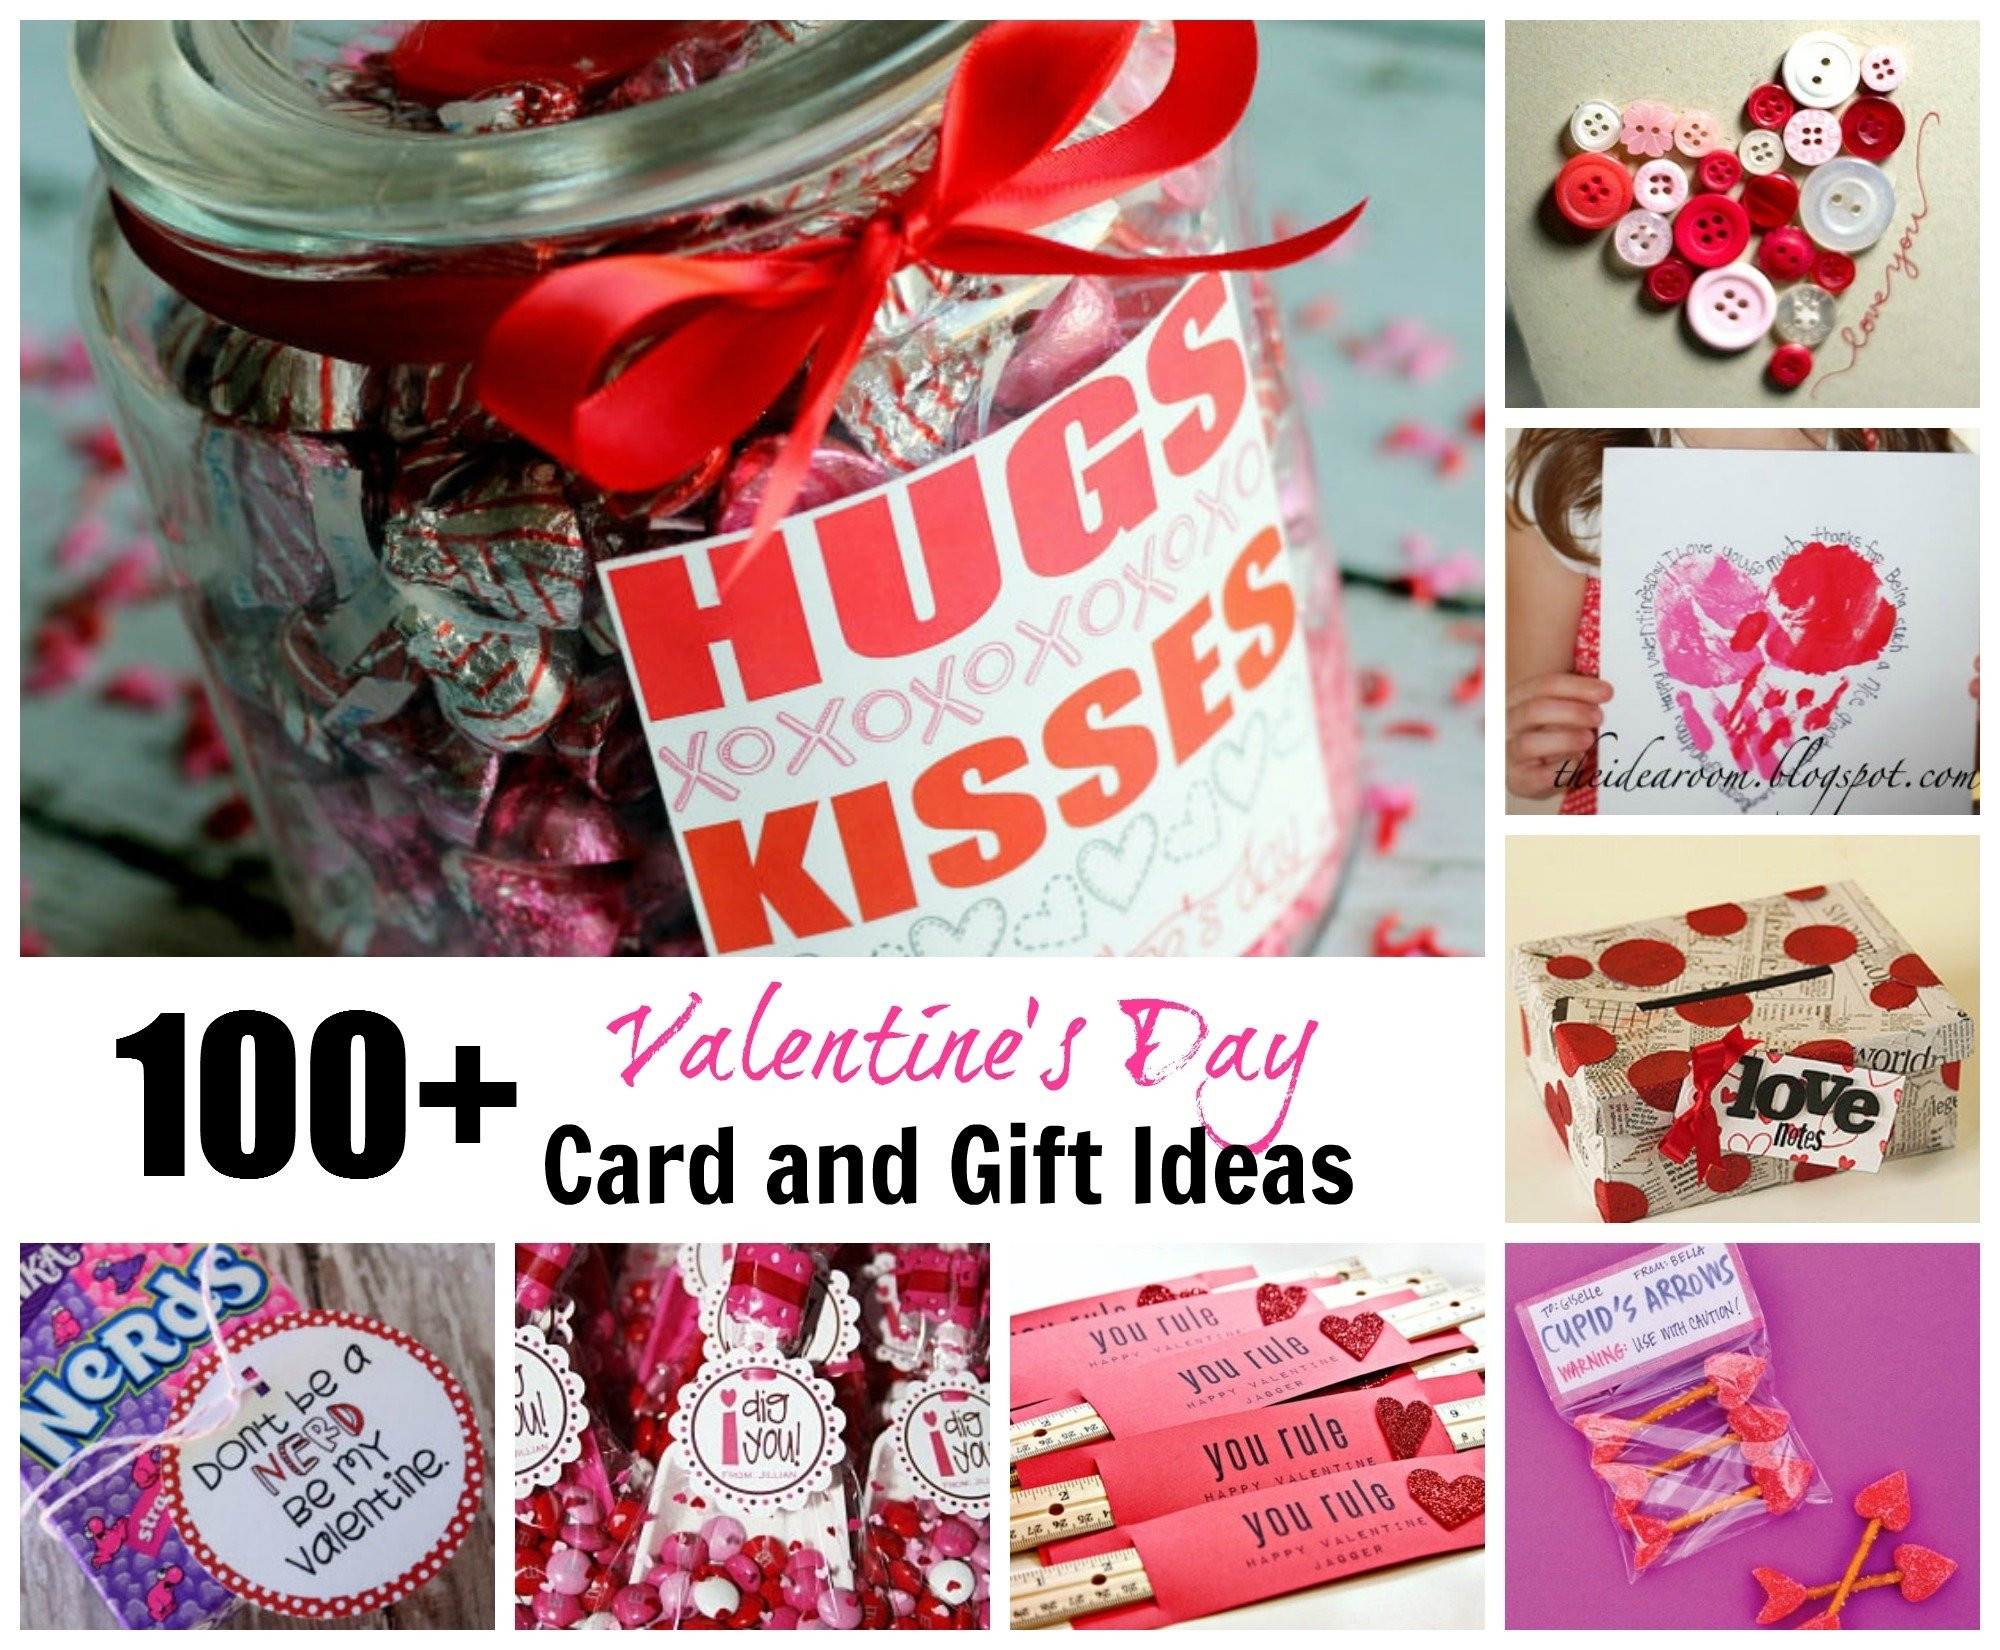 New Boyfriend Valentines Day Gift Ideas
 10 Lovable Homemade Valentines Ideas For Him 2020